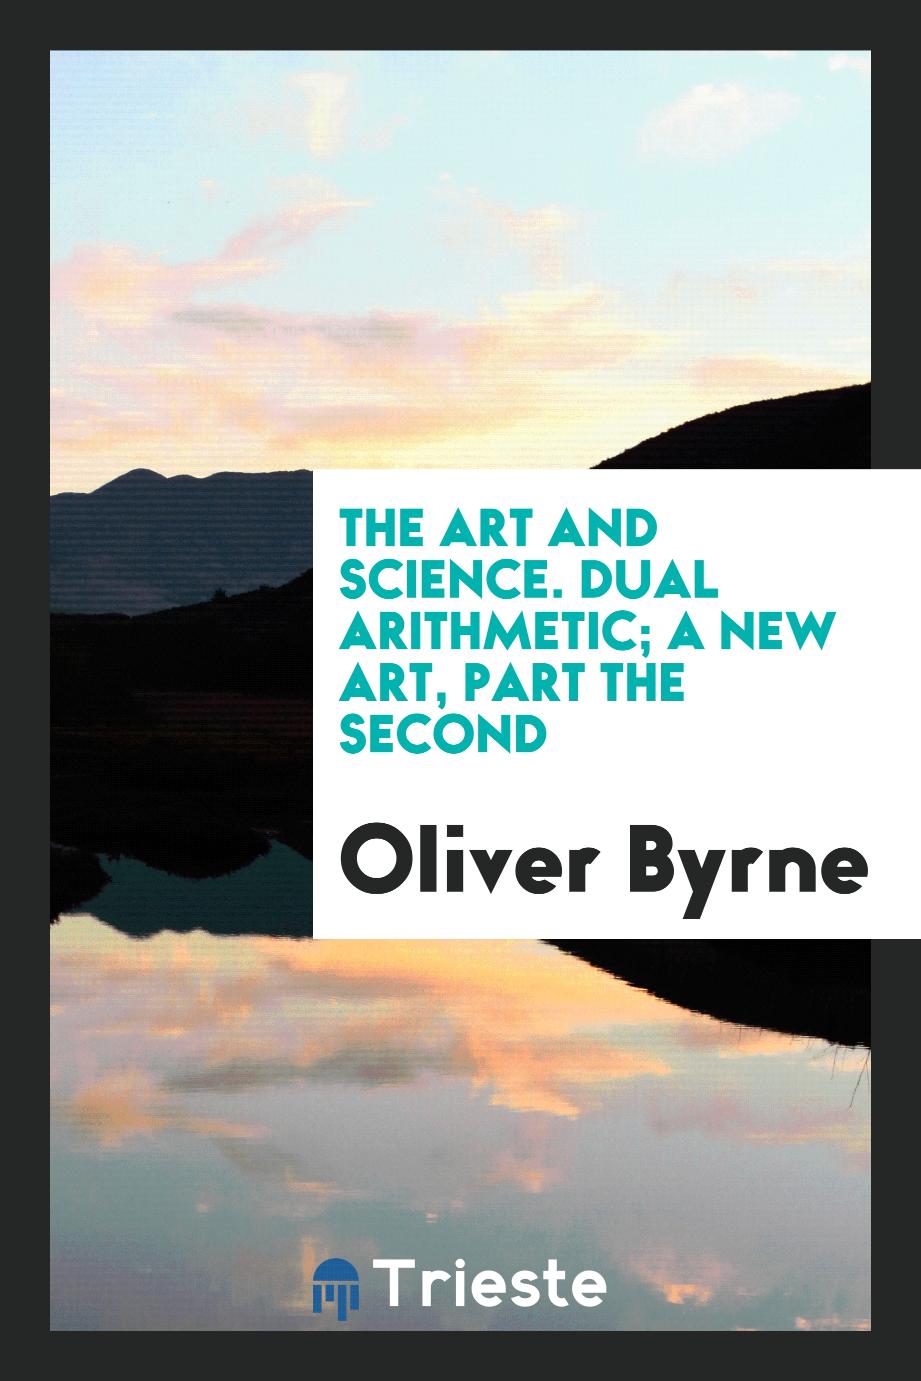 Oliver Byrne - The Art and Science. Dual Arithmetic; A New Art, Part the Second